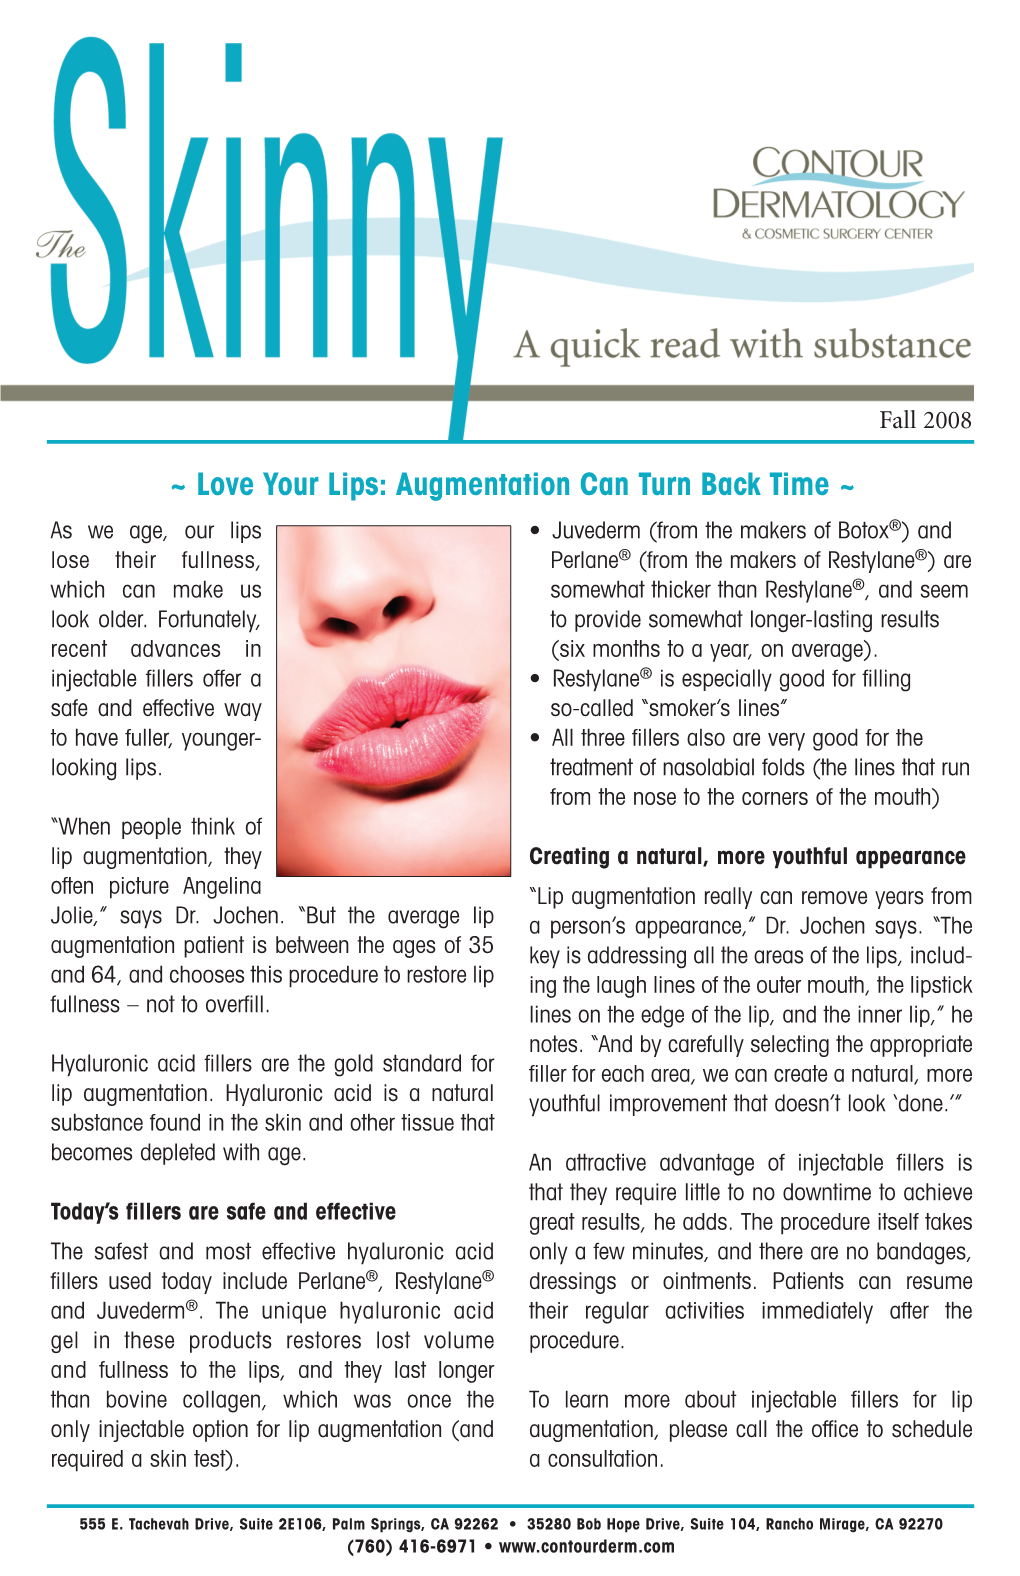 Love Your Lips: Augmentation Can Turn Back Time